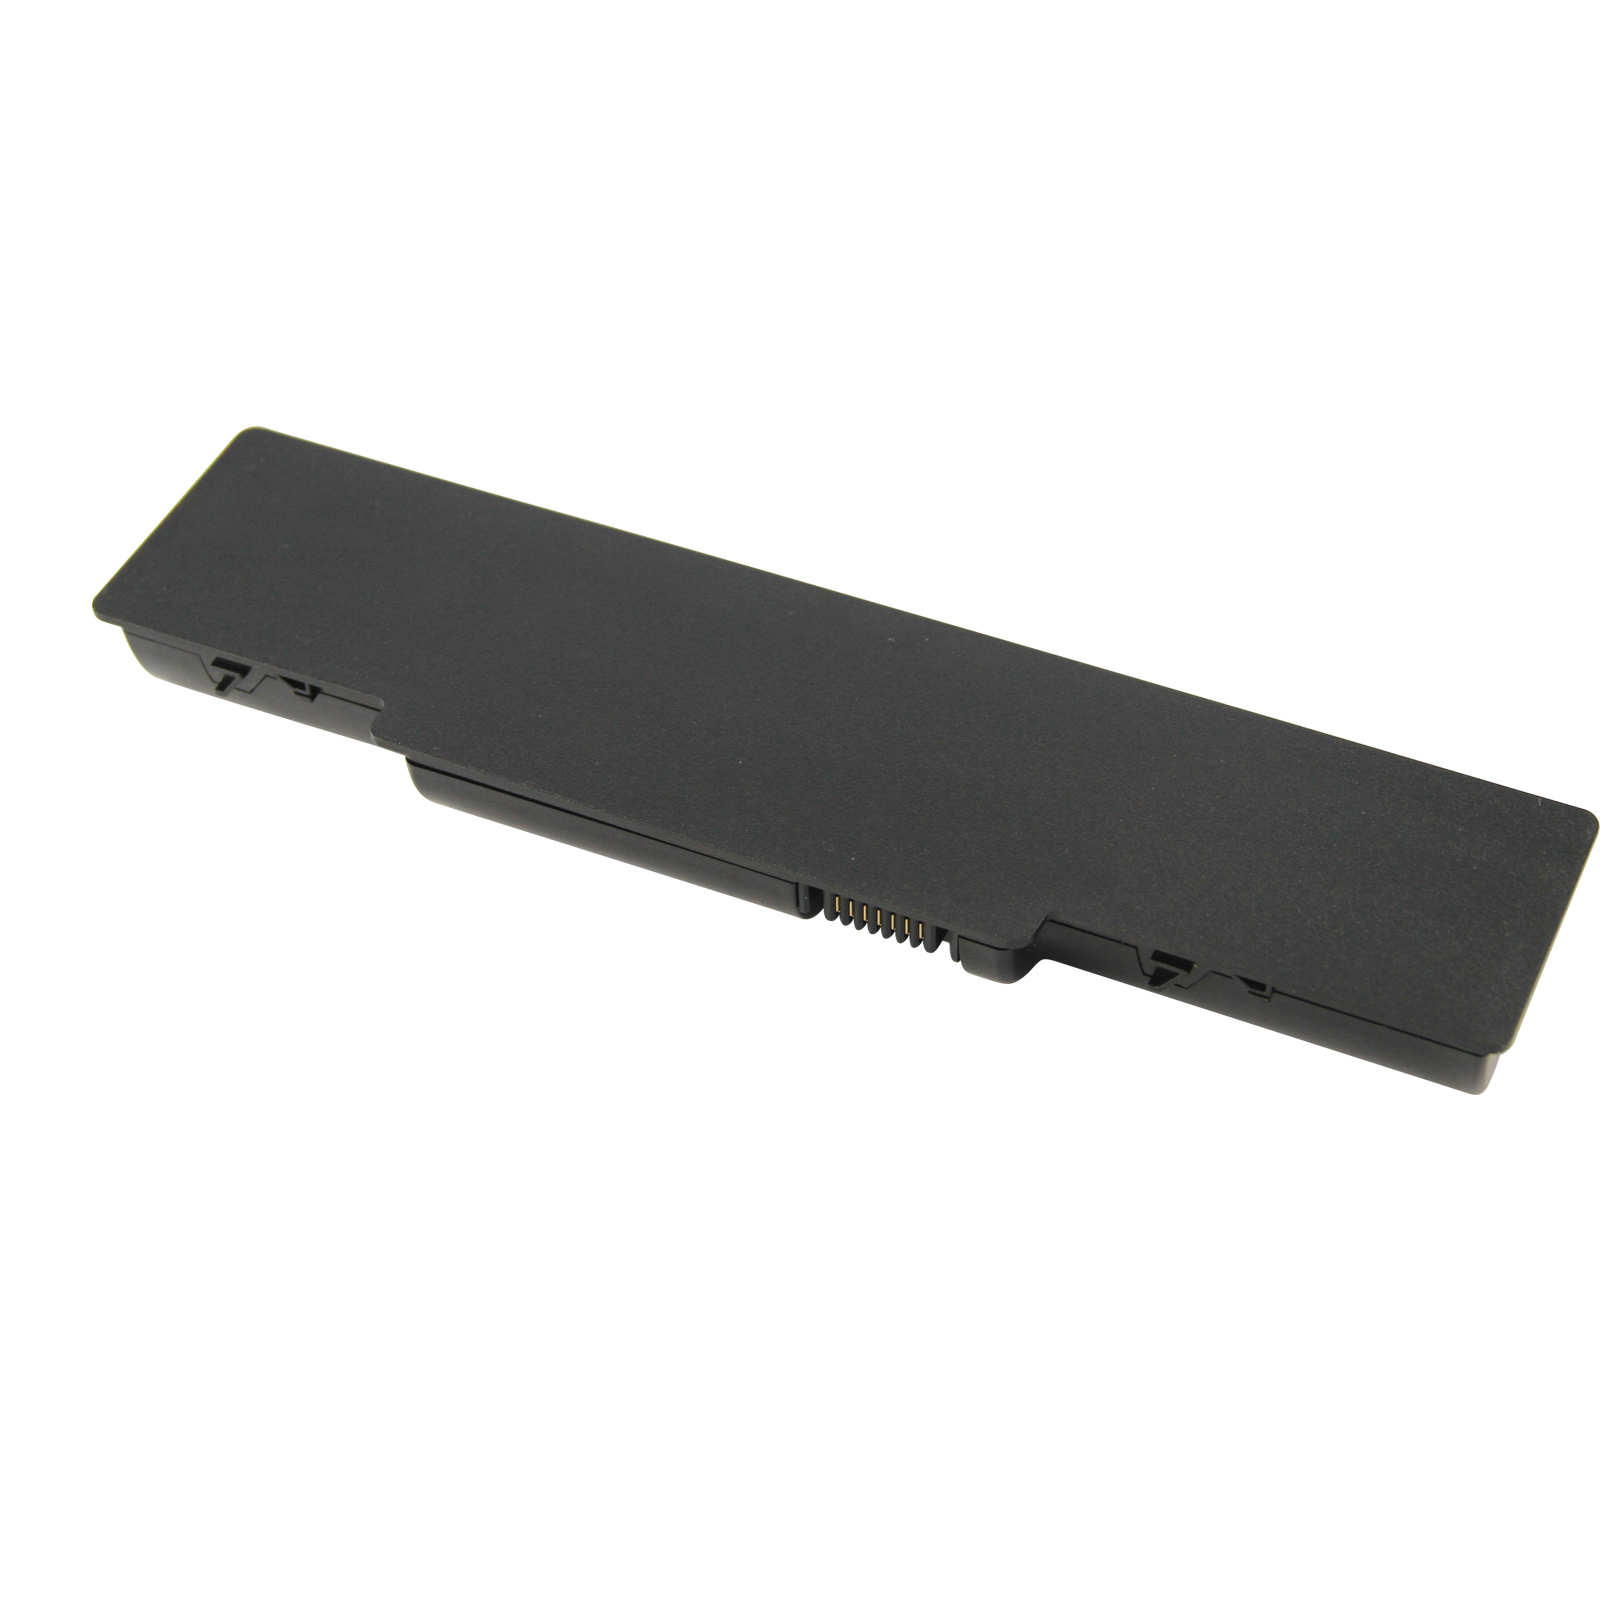 6 Cell Battery for Acer Aspire 5516 5517 5532 5334 5732z AS09A31 AS09A41 AS09A61 - image 3 of 4